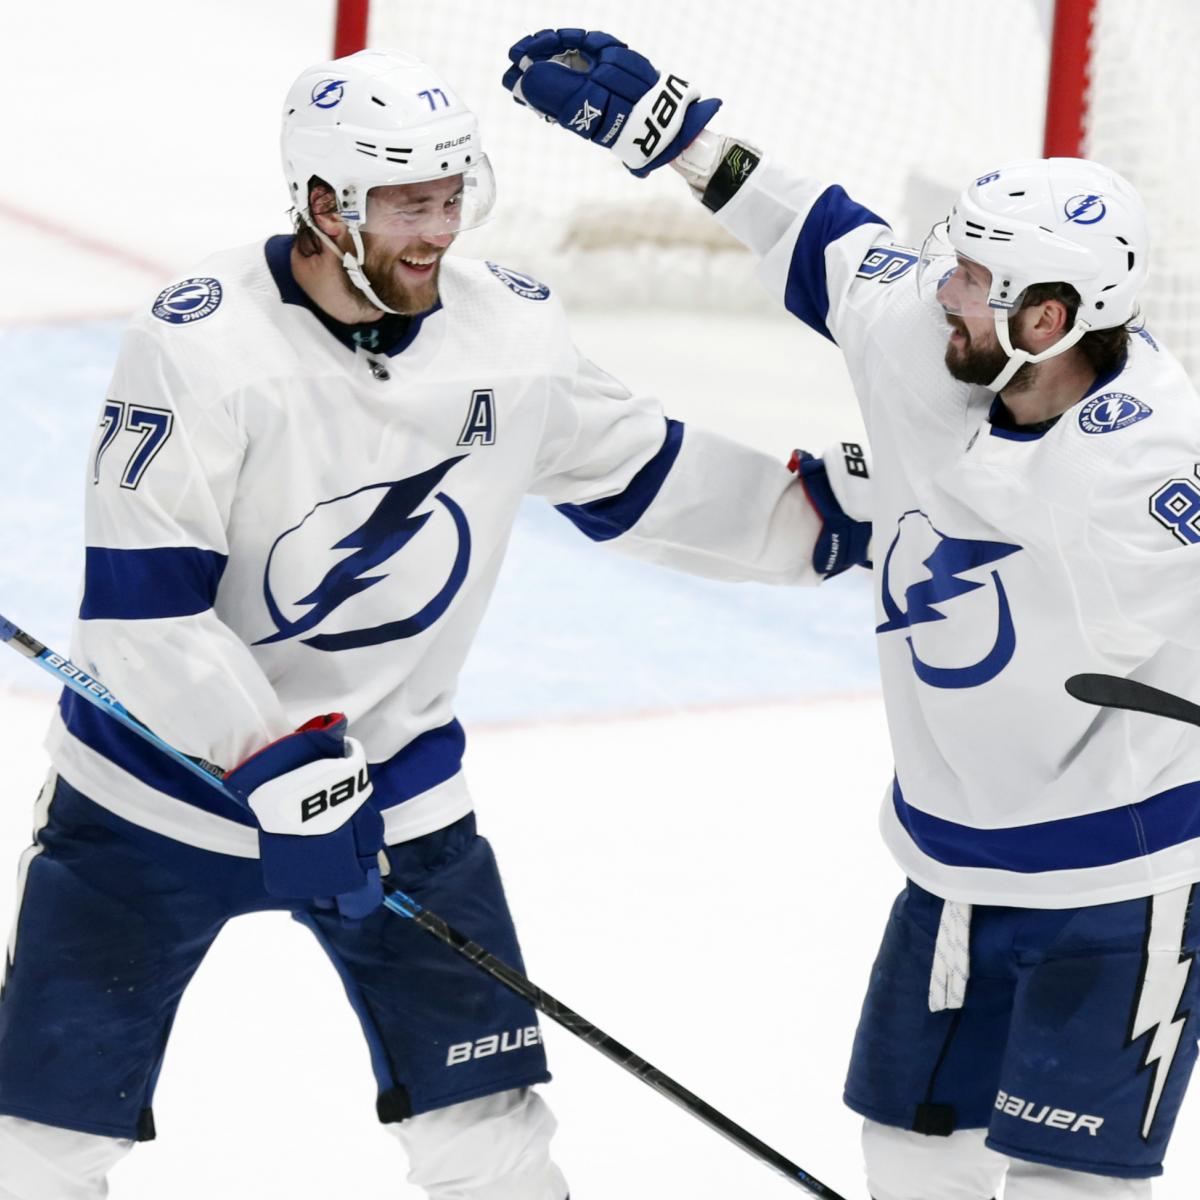 NHL Playoff Bracket 2020: Complete 1st-Round Schedule and Series Predictions